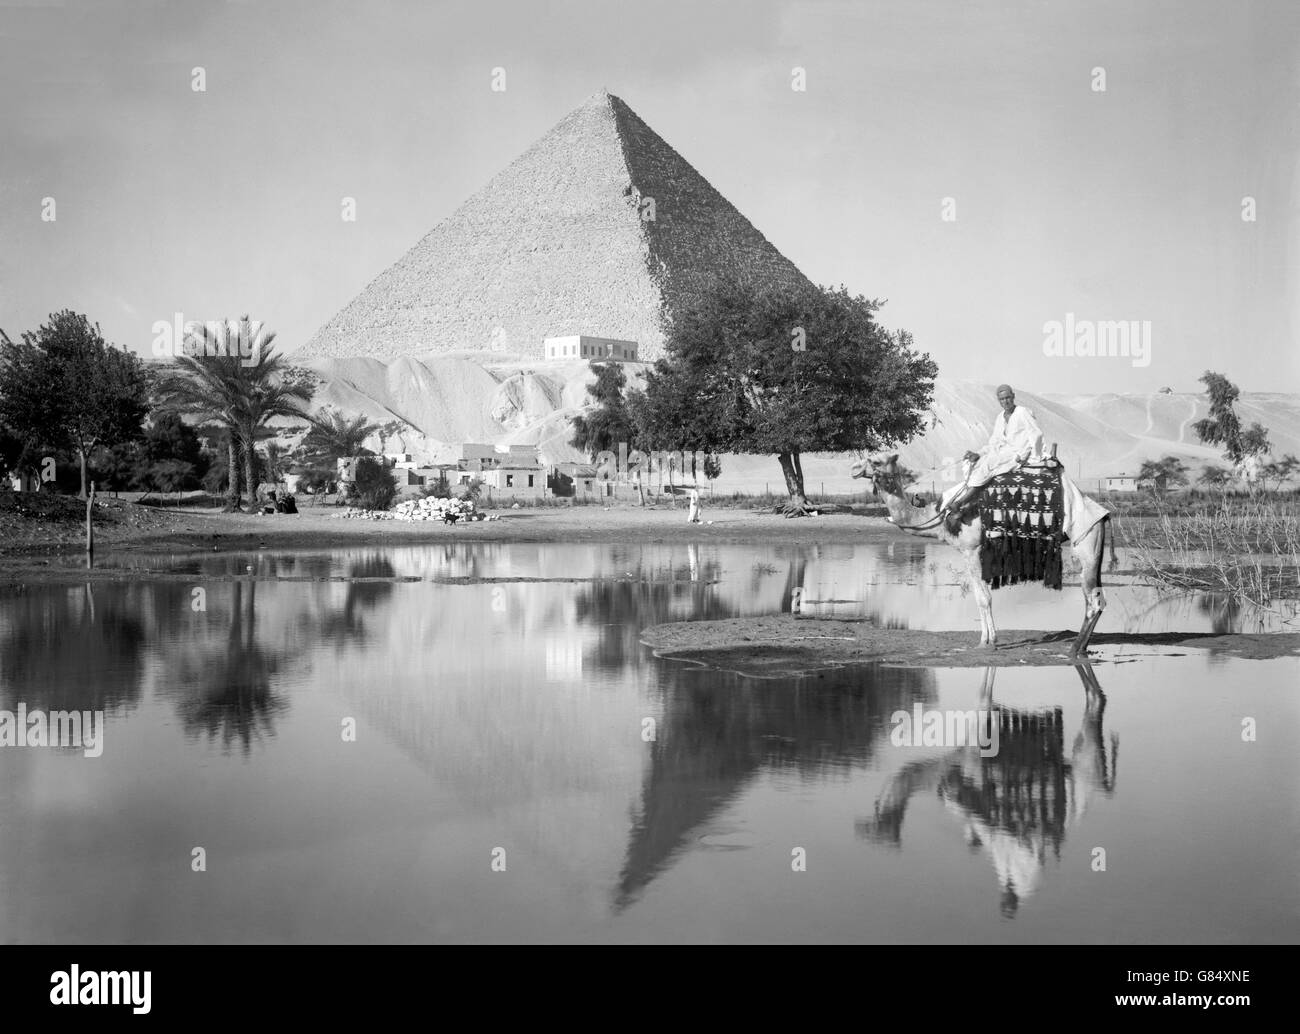 The Great Pyramid of Giza in the early 20th Century. Photo taken between 1934 and 1939 by American Colony Photo Department. Stock Photo